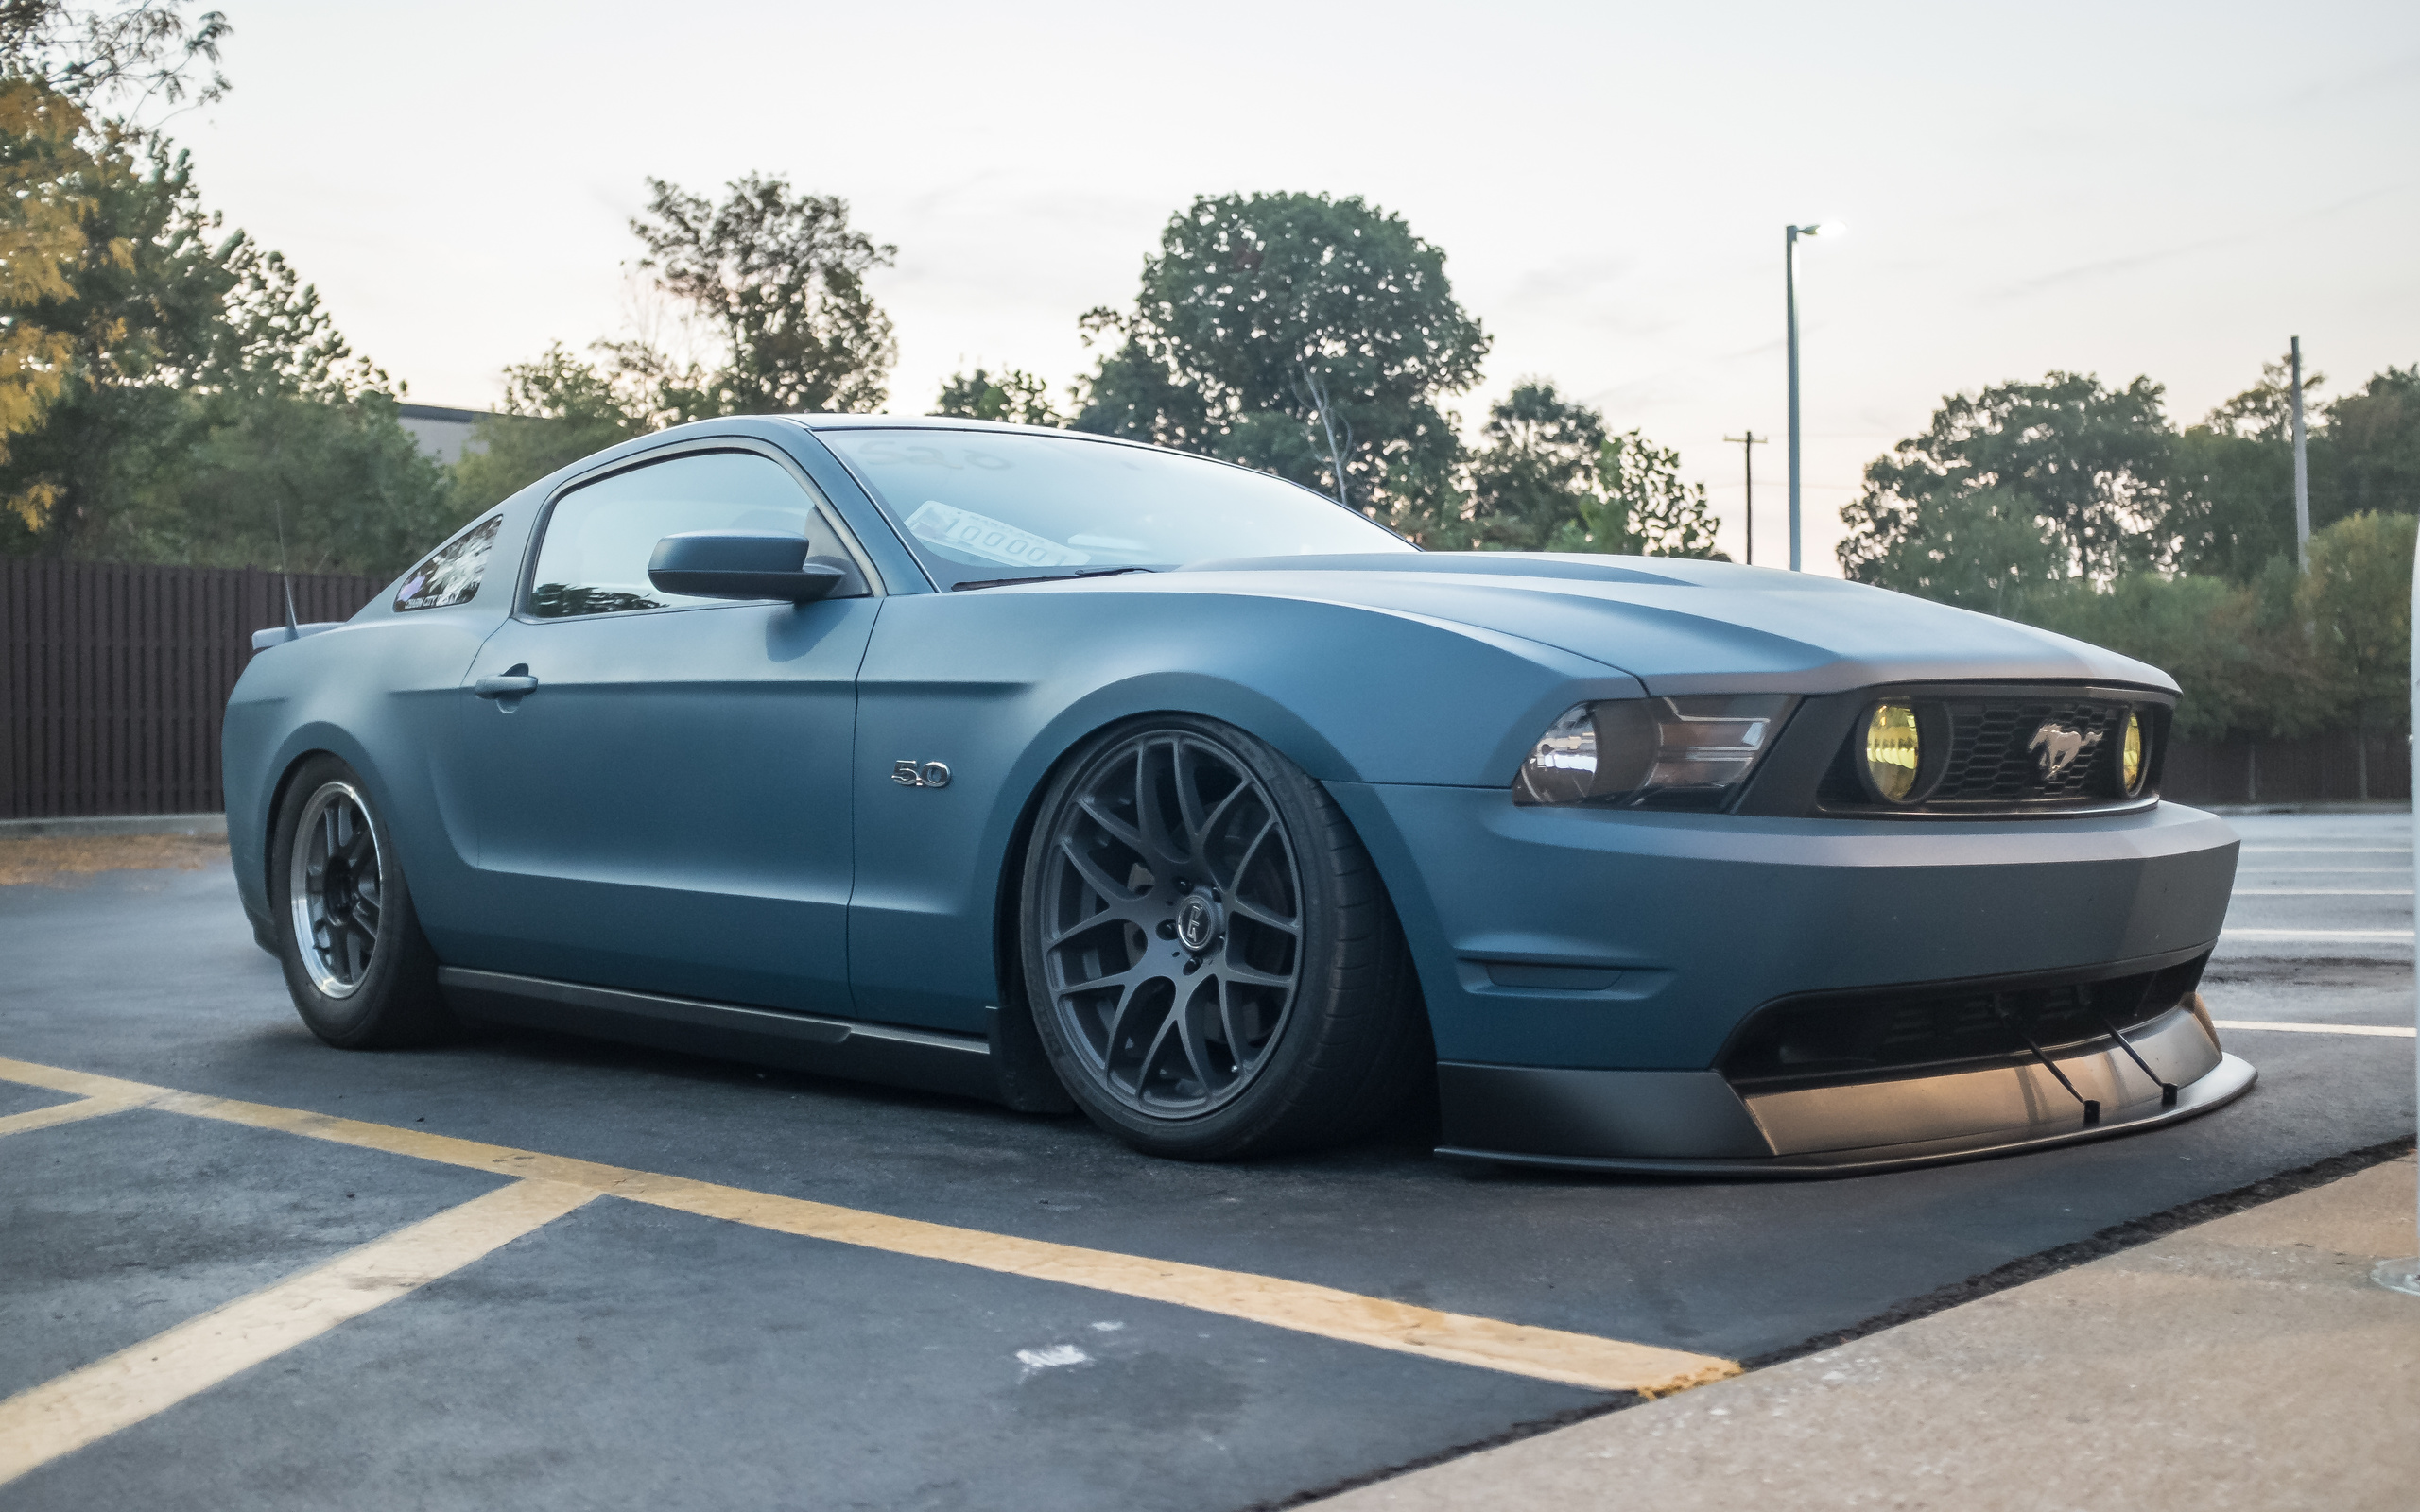 ford, mustang, muscle cars, tuning, blue